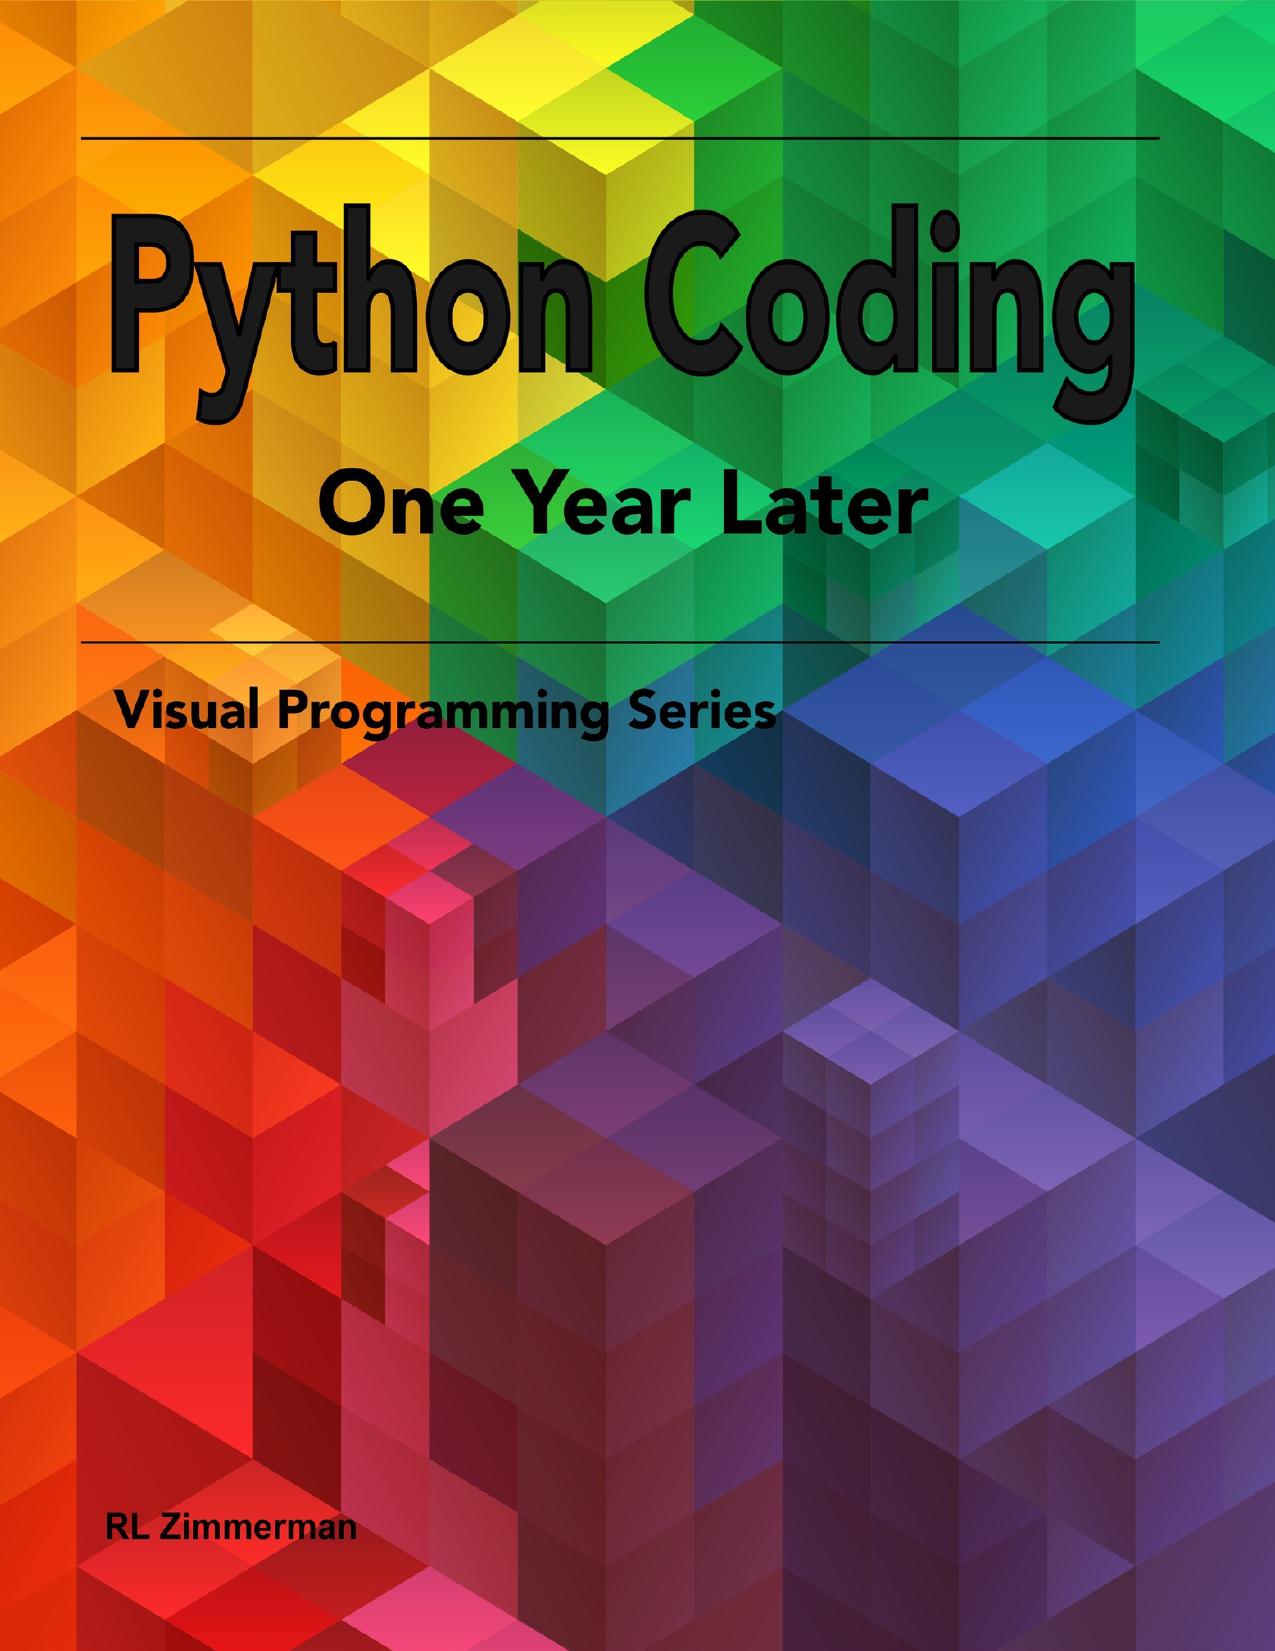 Python Coding - One Year Later: A Treasure Trove of Practical and Simple Examples